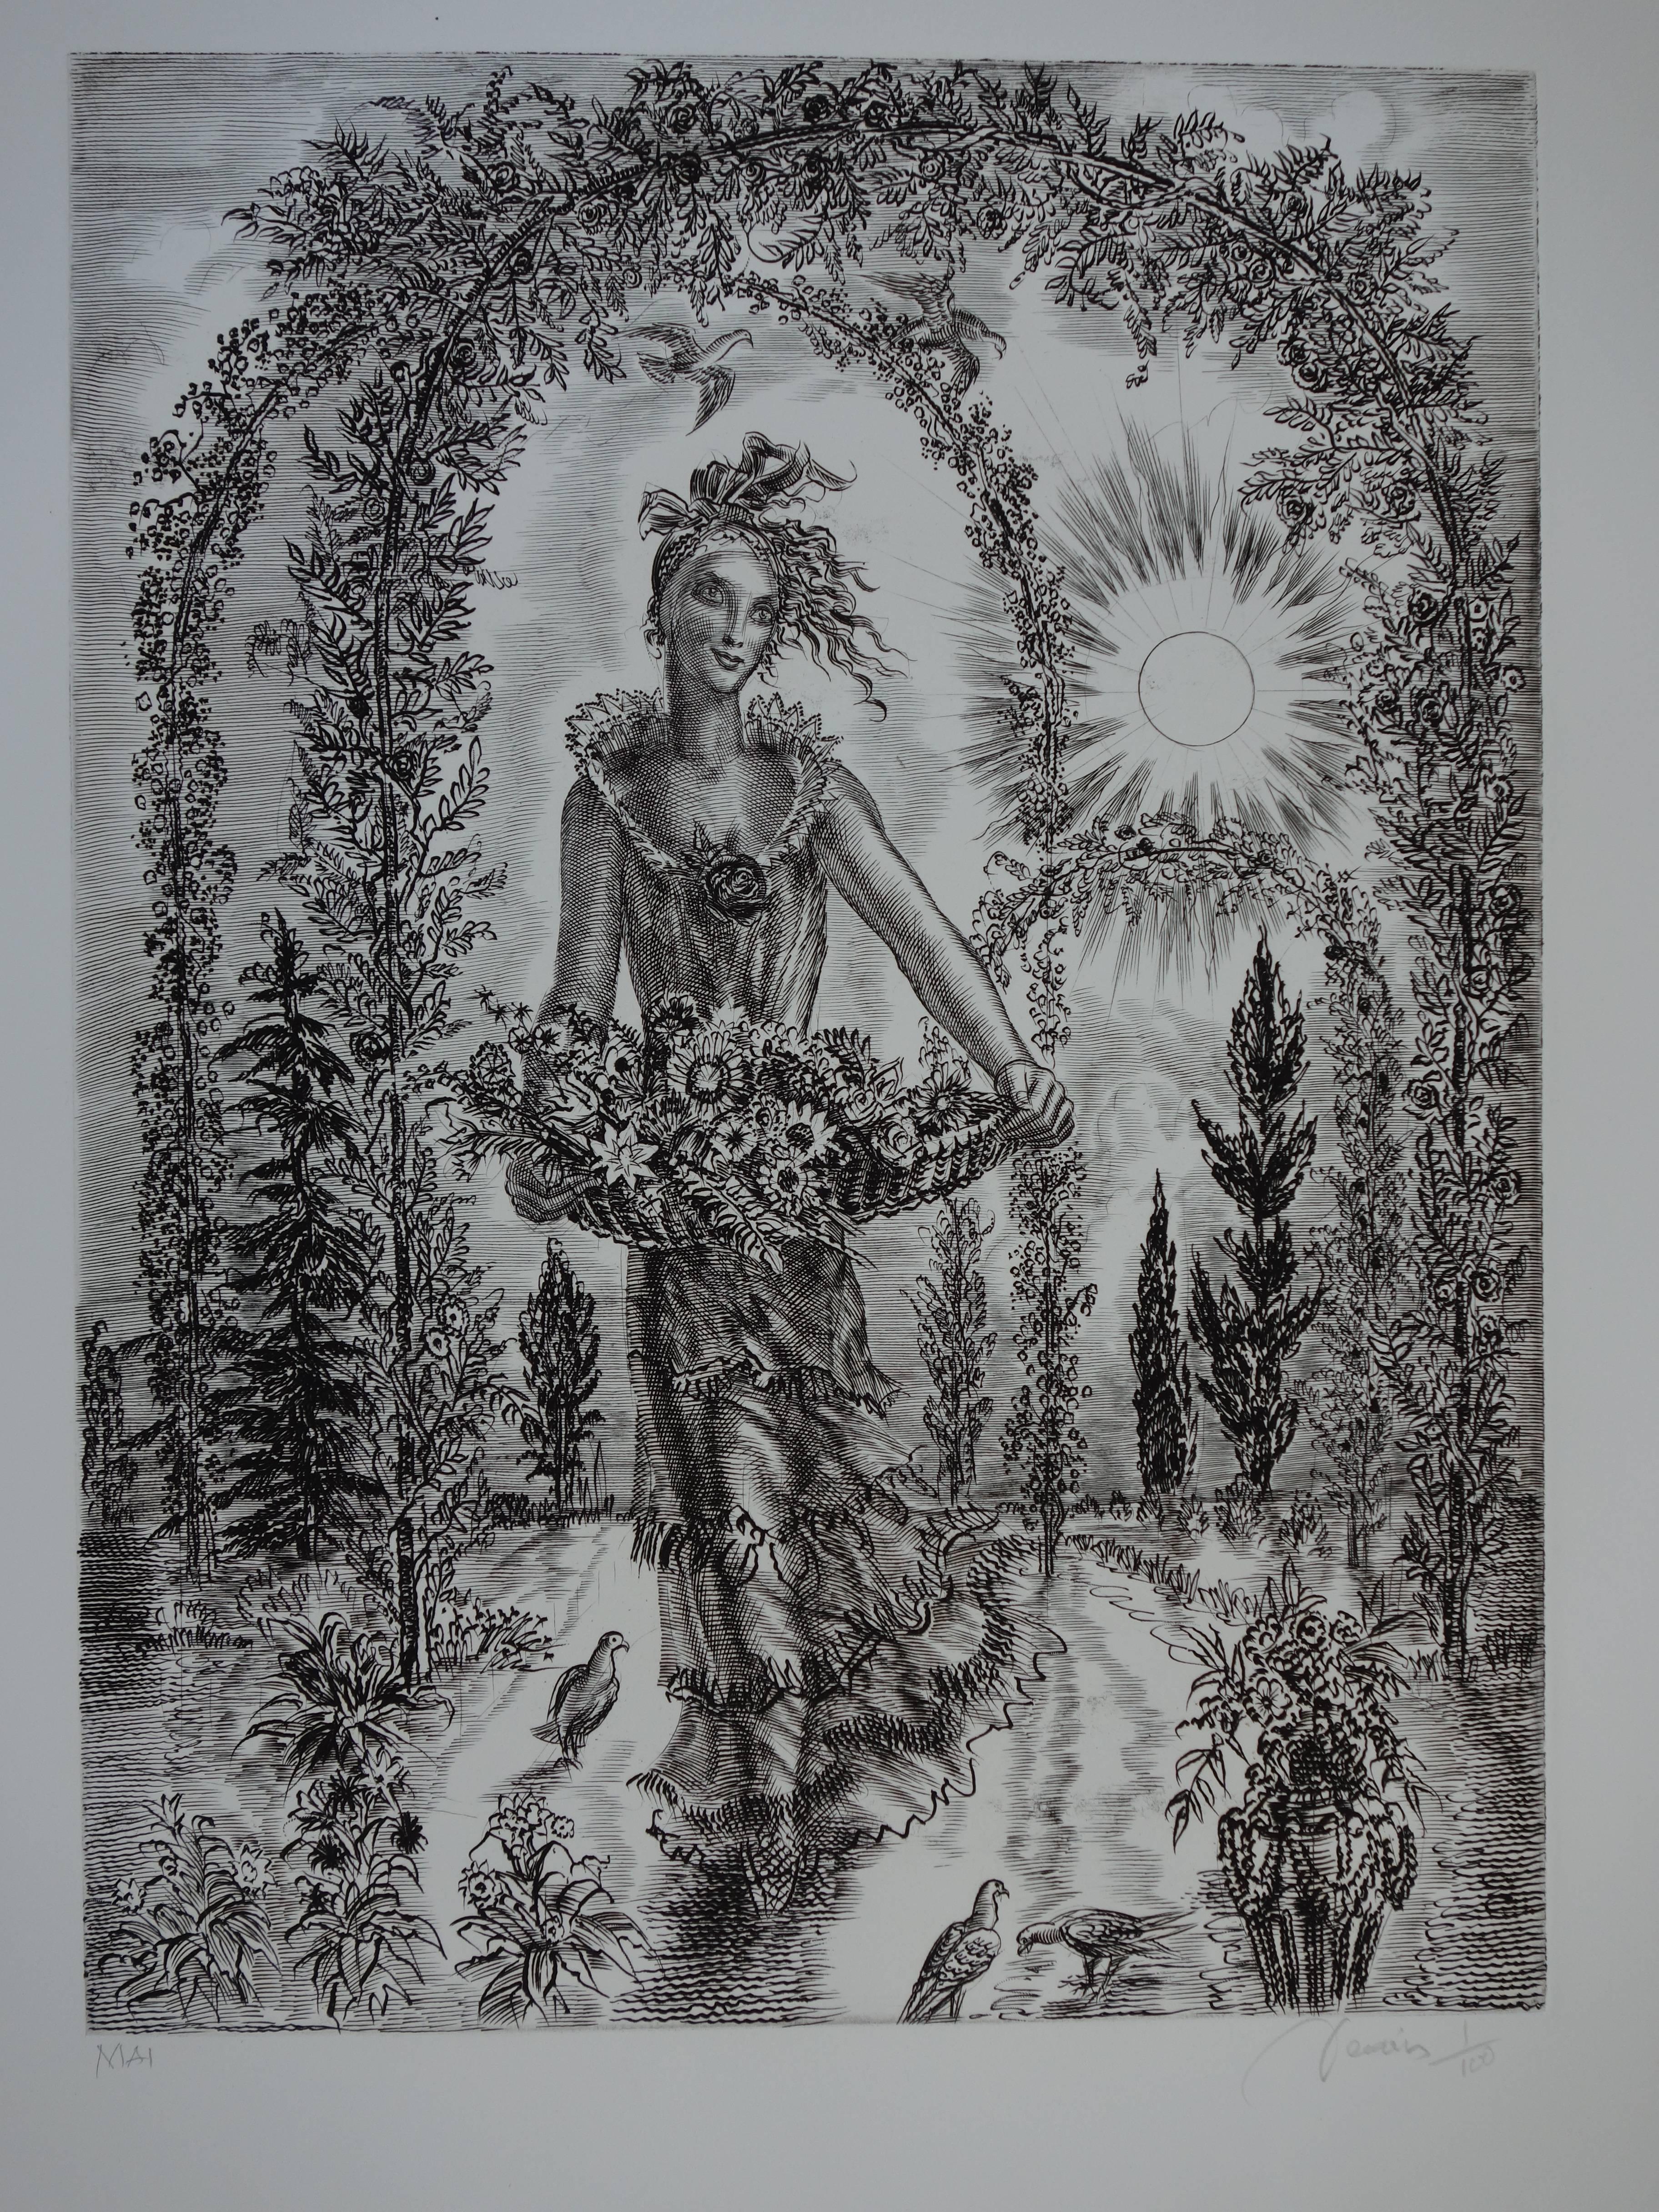 Albert Decaris Figurative Print - May : Blossom Spring - Original handsigned etching - Exceptional n° 1/100